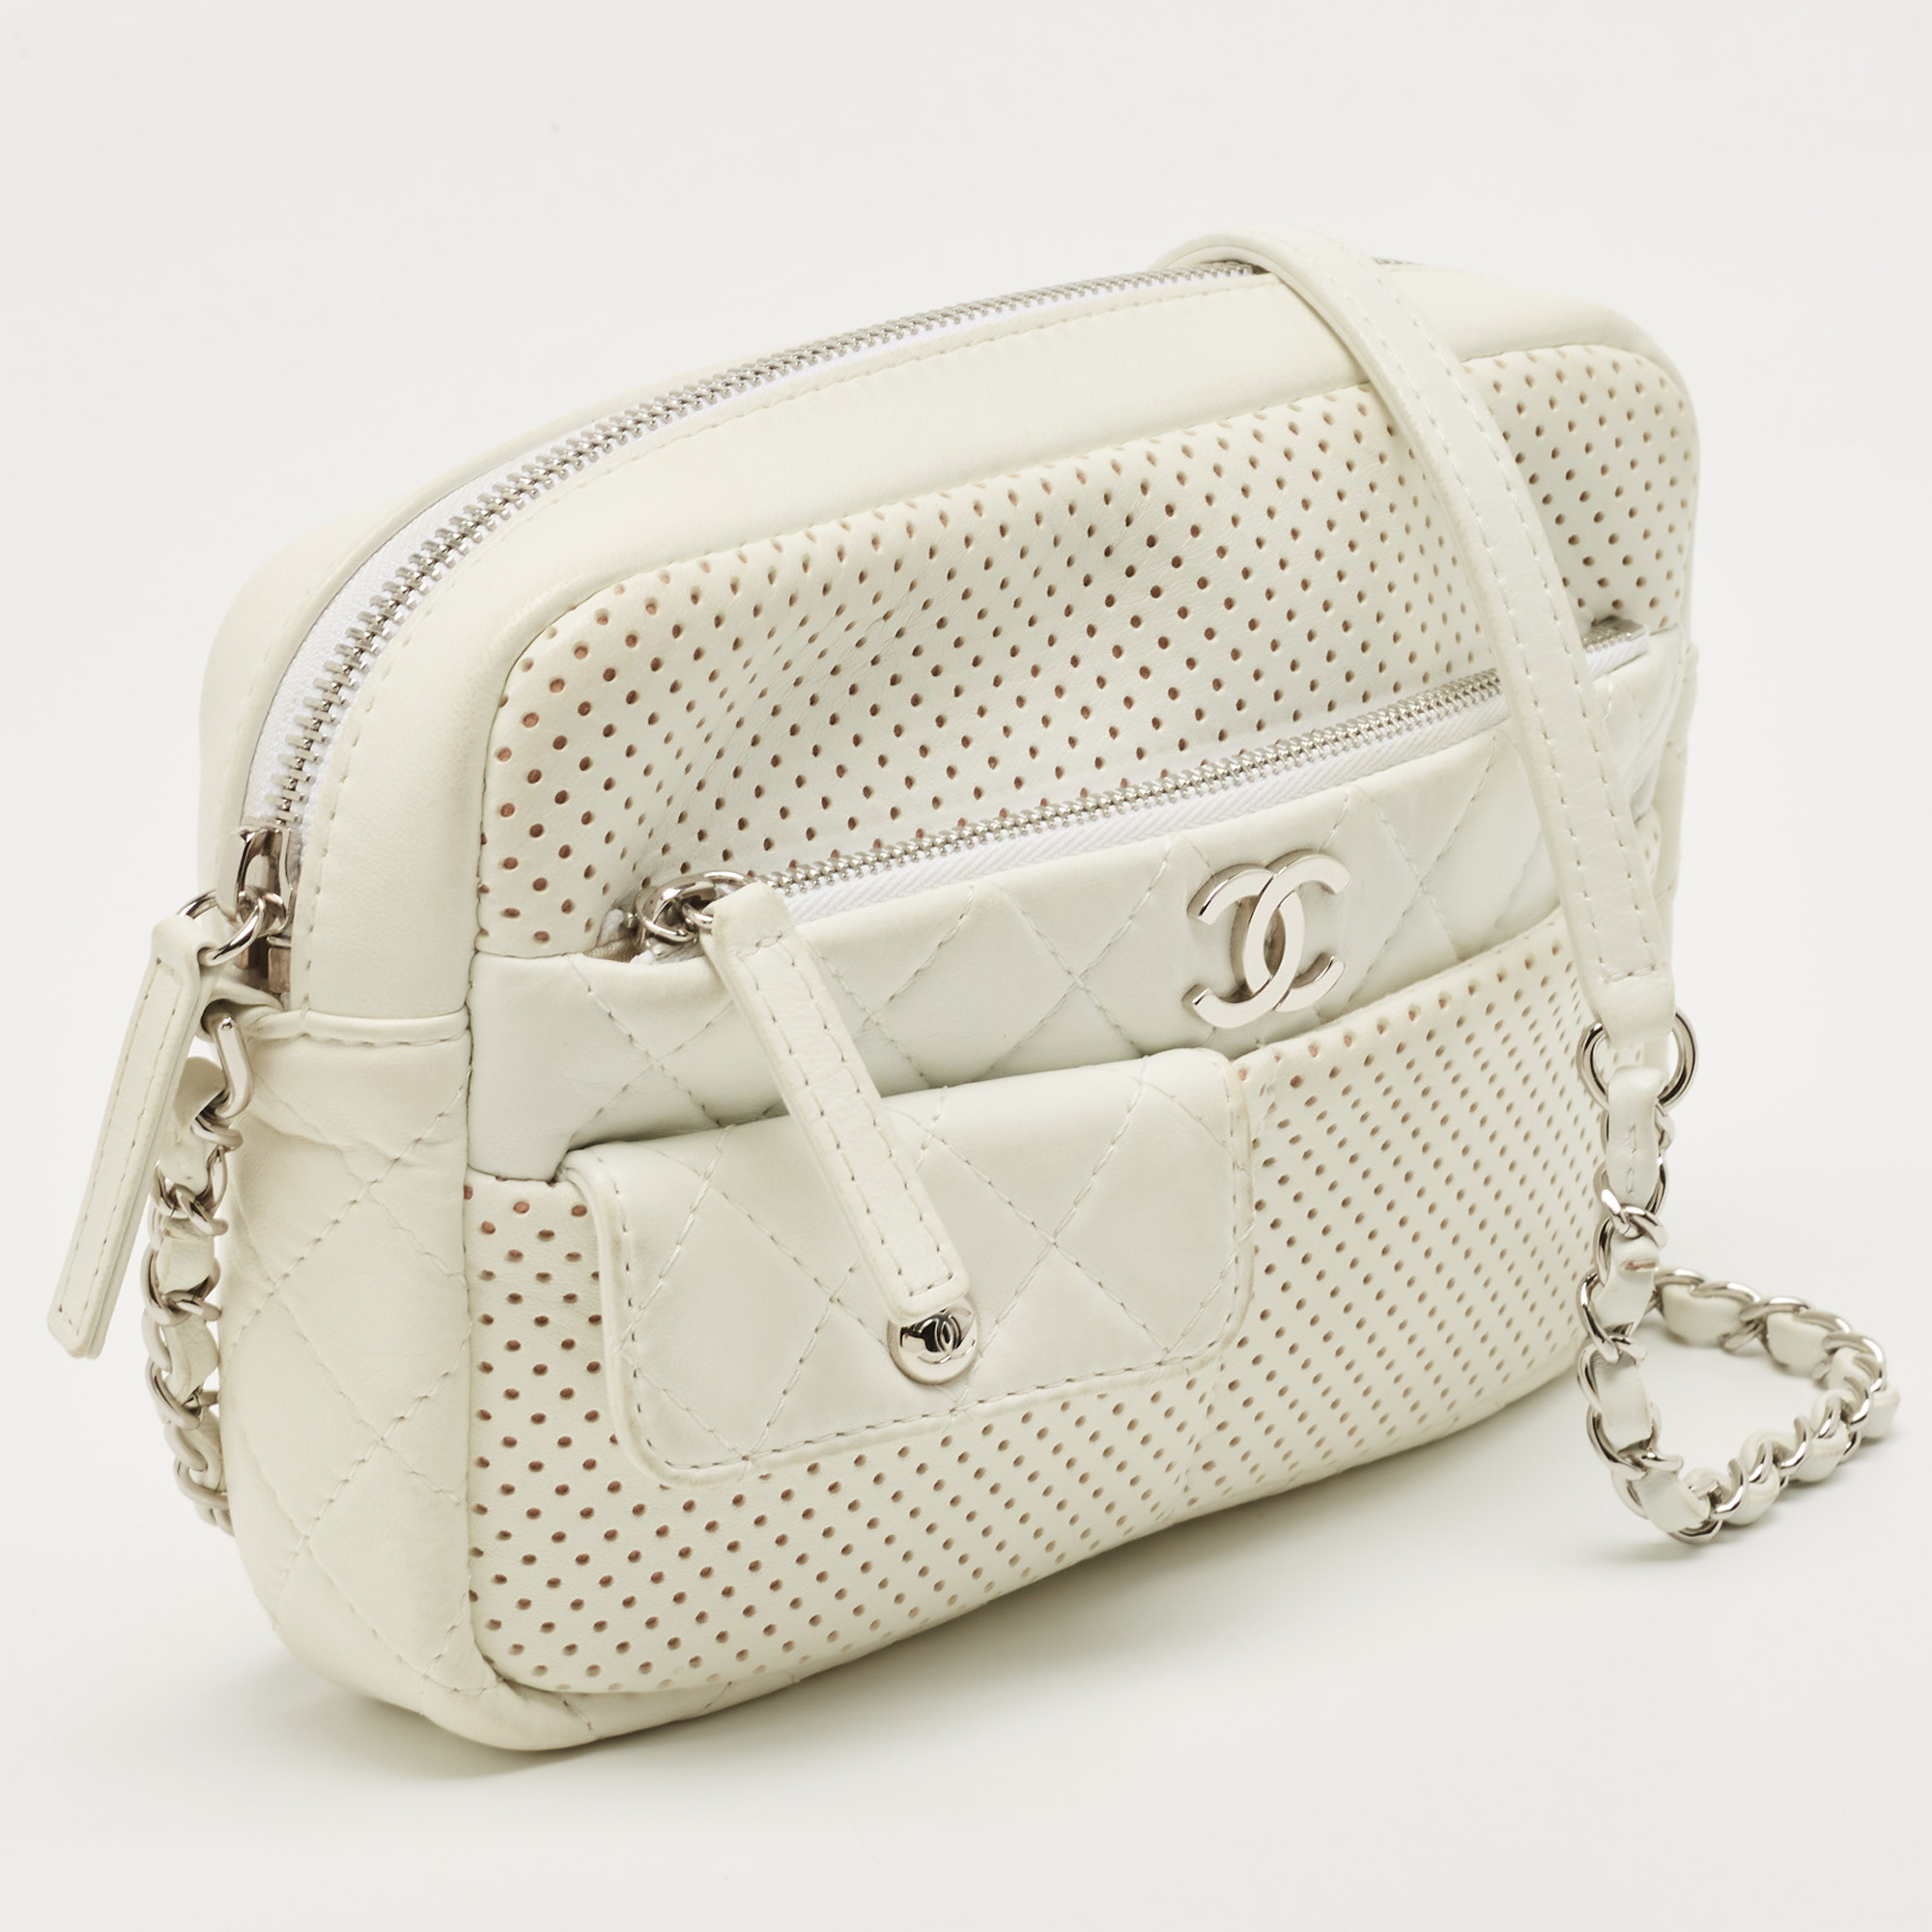 Chanel White Perforated Leather Ultra Pocket Camera Bag